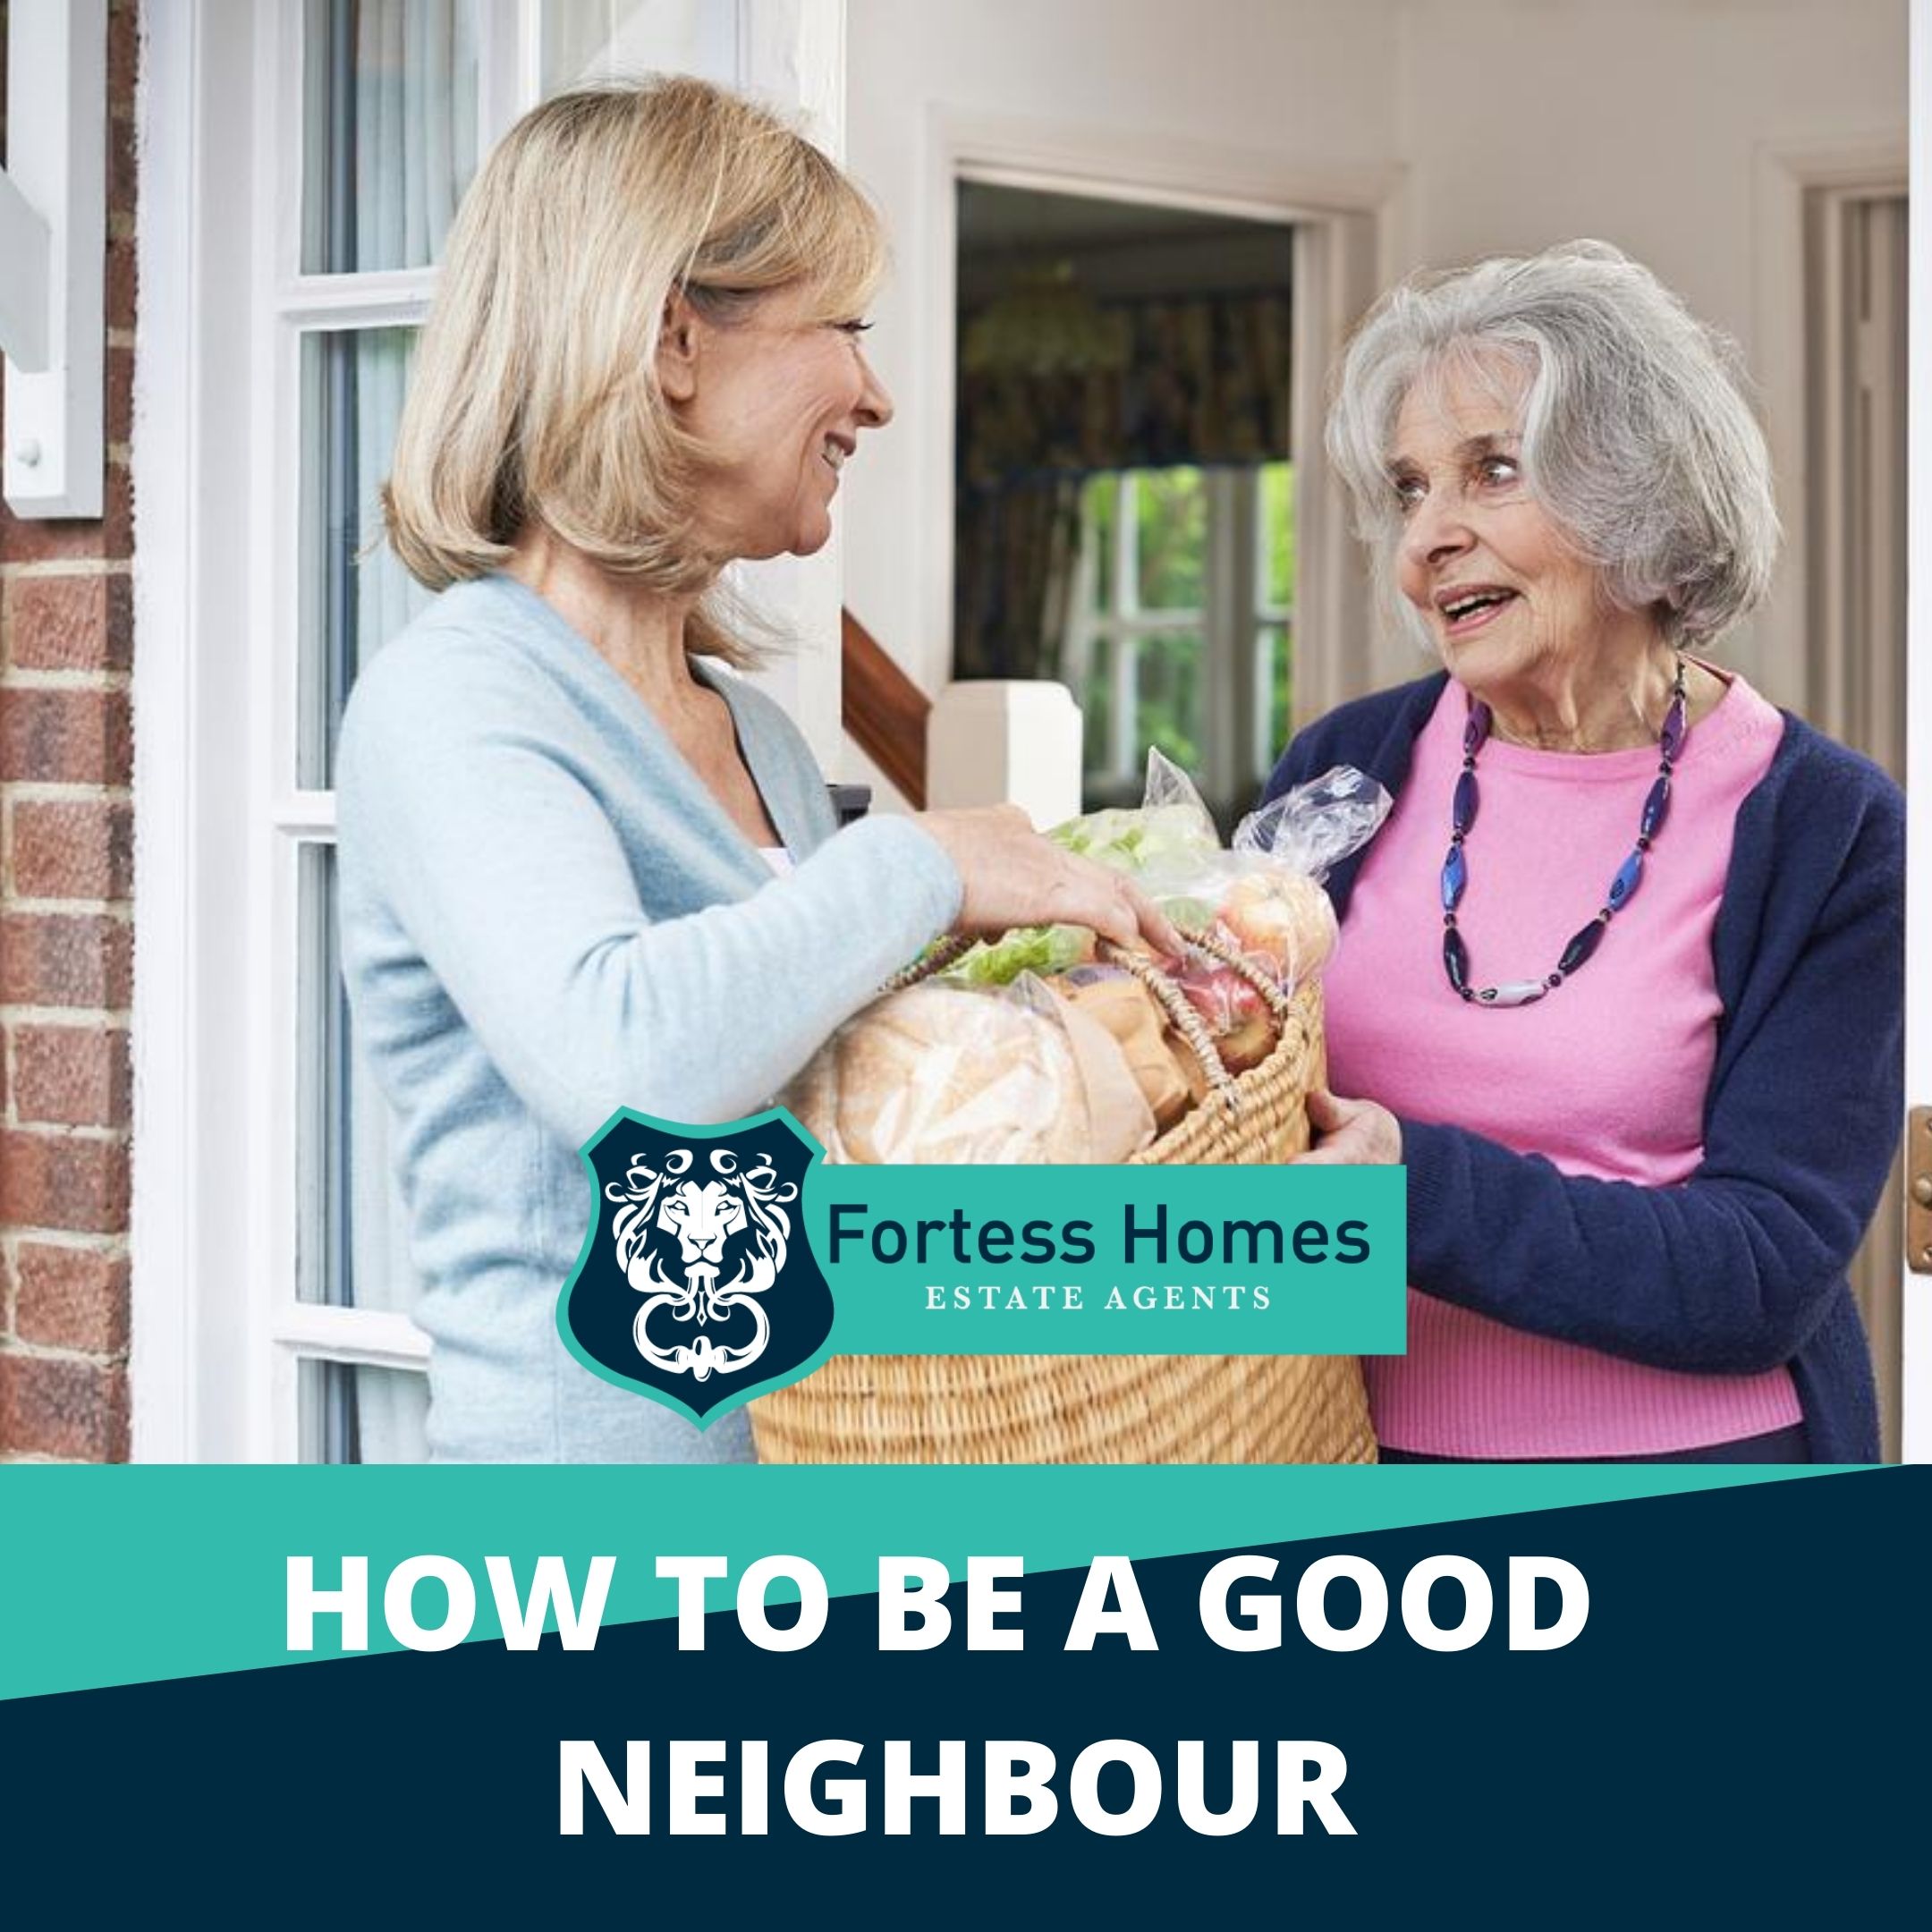 How to Be a Good Neighbour